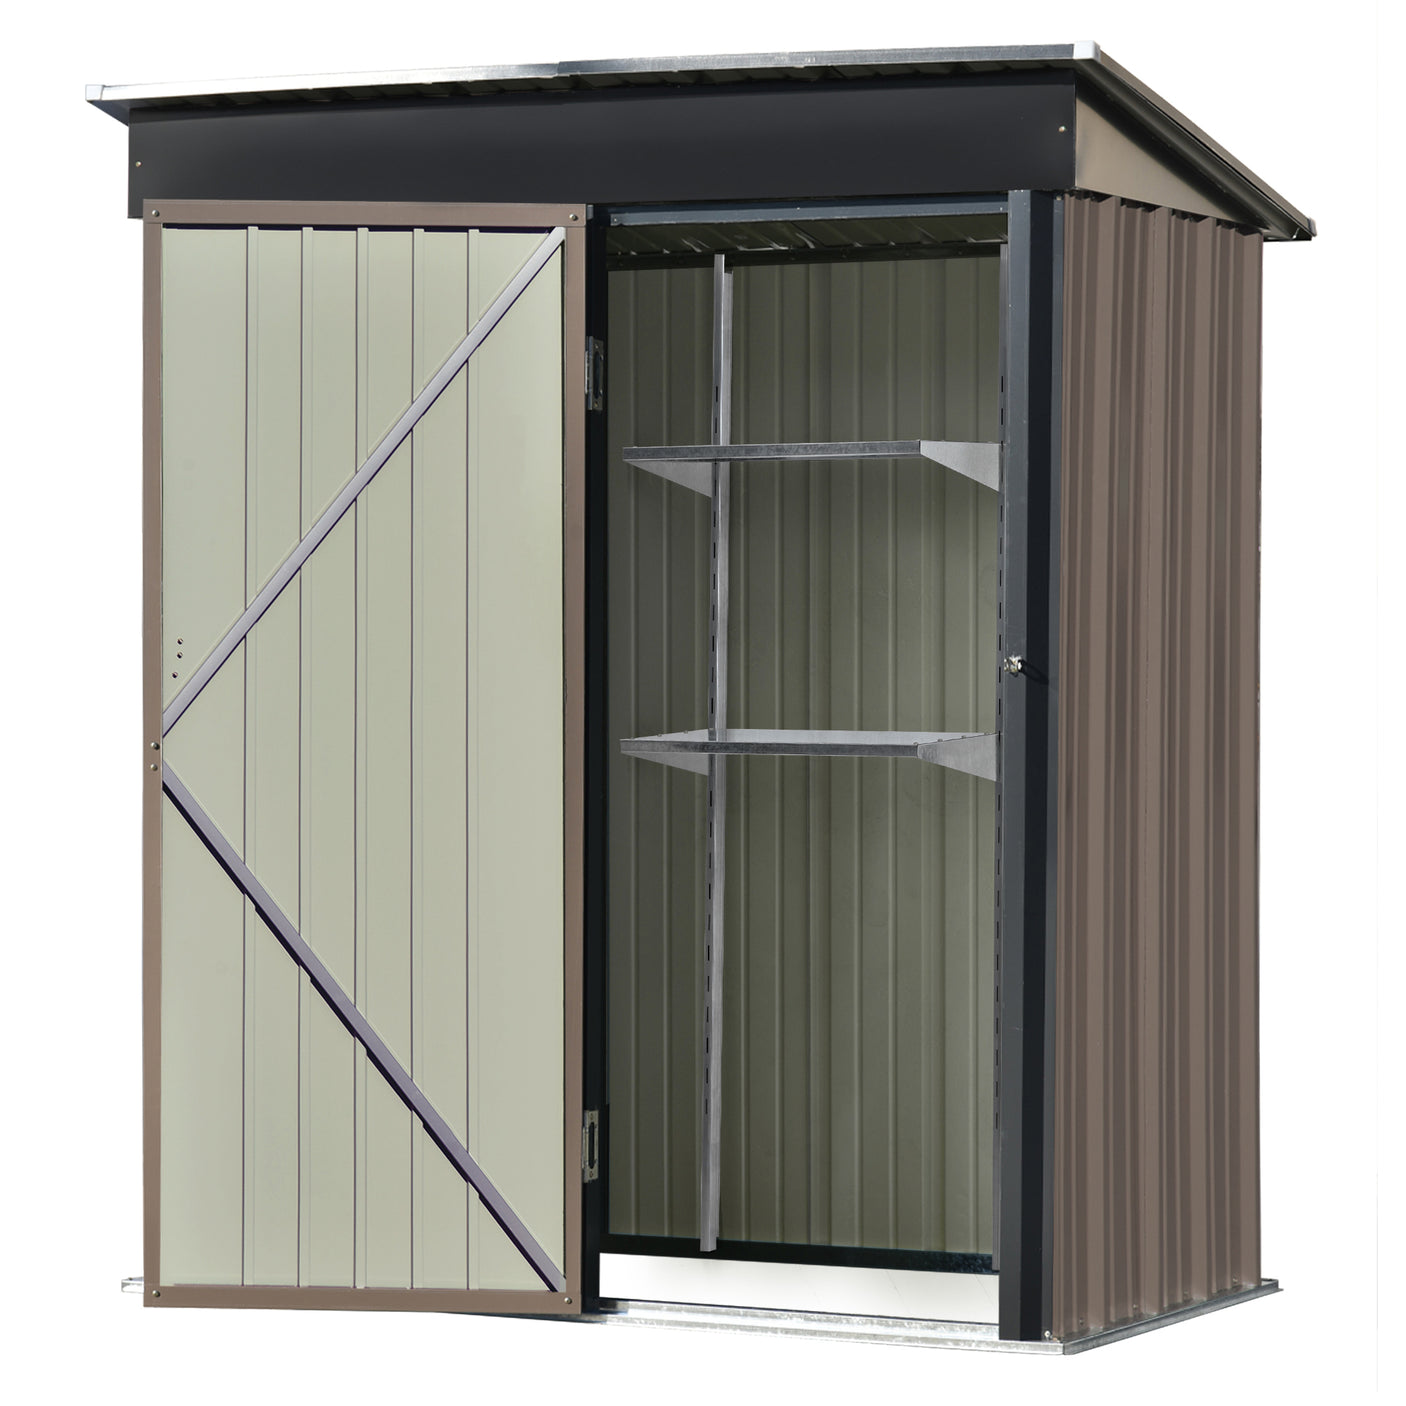 TOPMAX Patio 5ft Wx3ft. L Garden Shed, Metal Lean-to Storage Shed with Adjustable Shelf and Lockable Door, Tool Cabinet for Backyard, Lawn, Garden, Brown